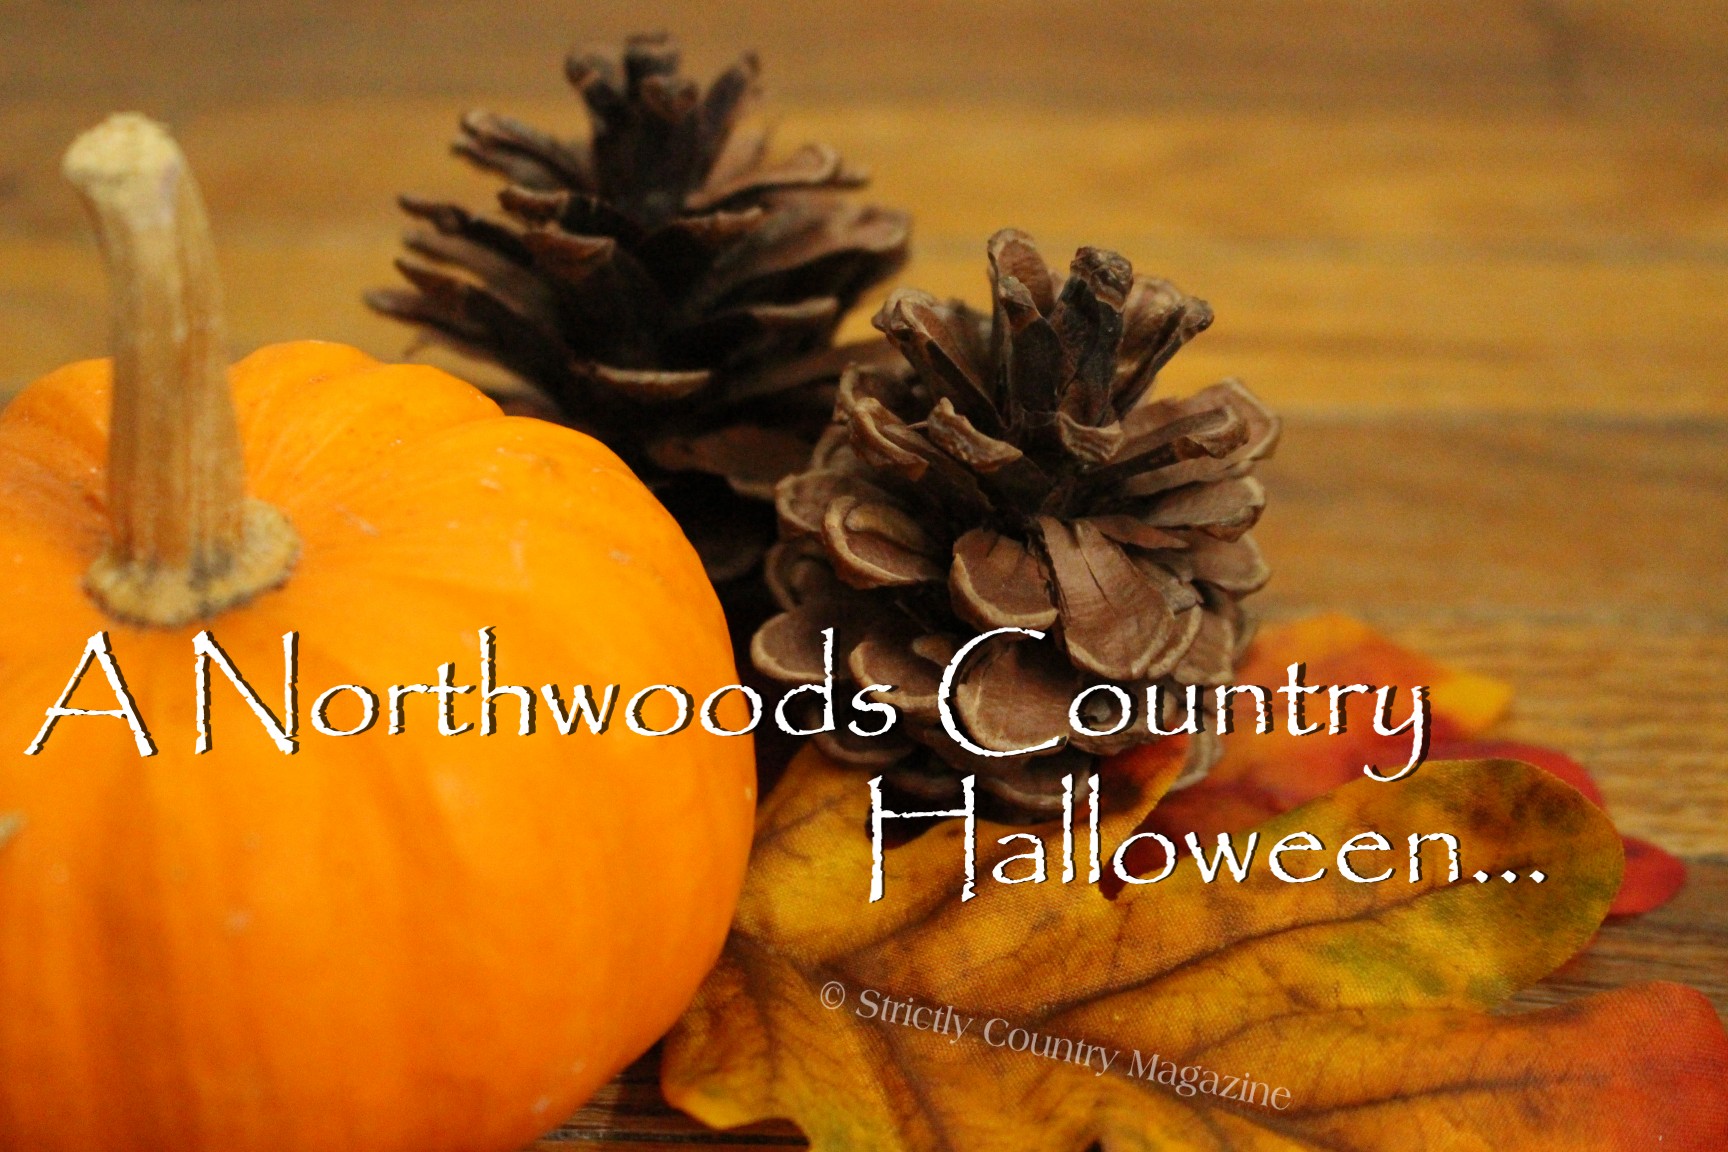 Strictly Country Magazine copyright A Northwoods Country Halloween